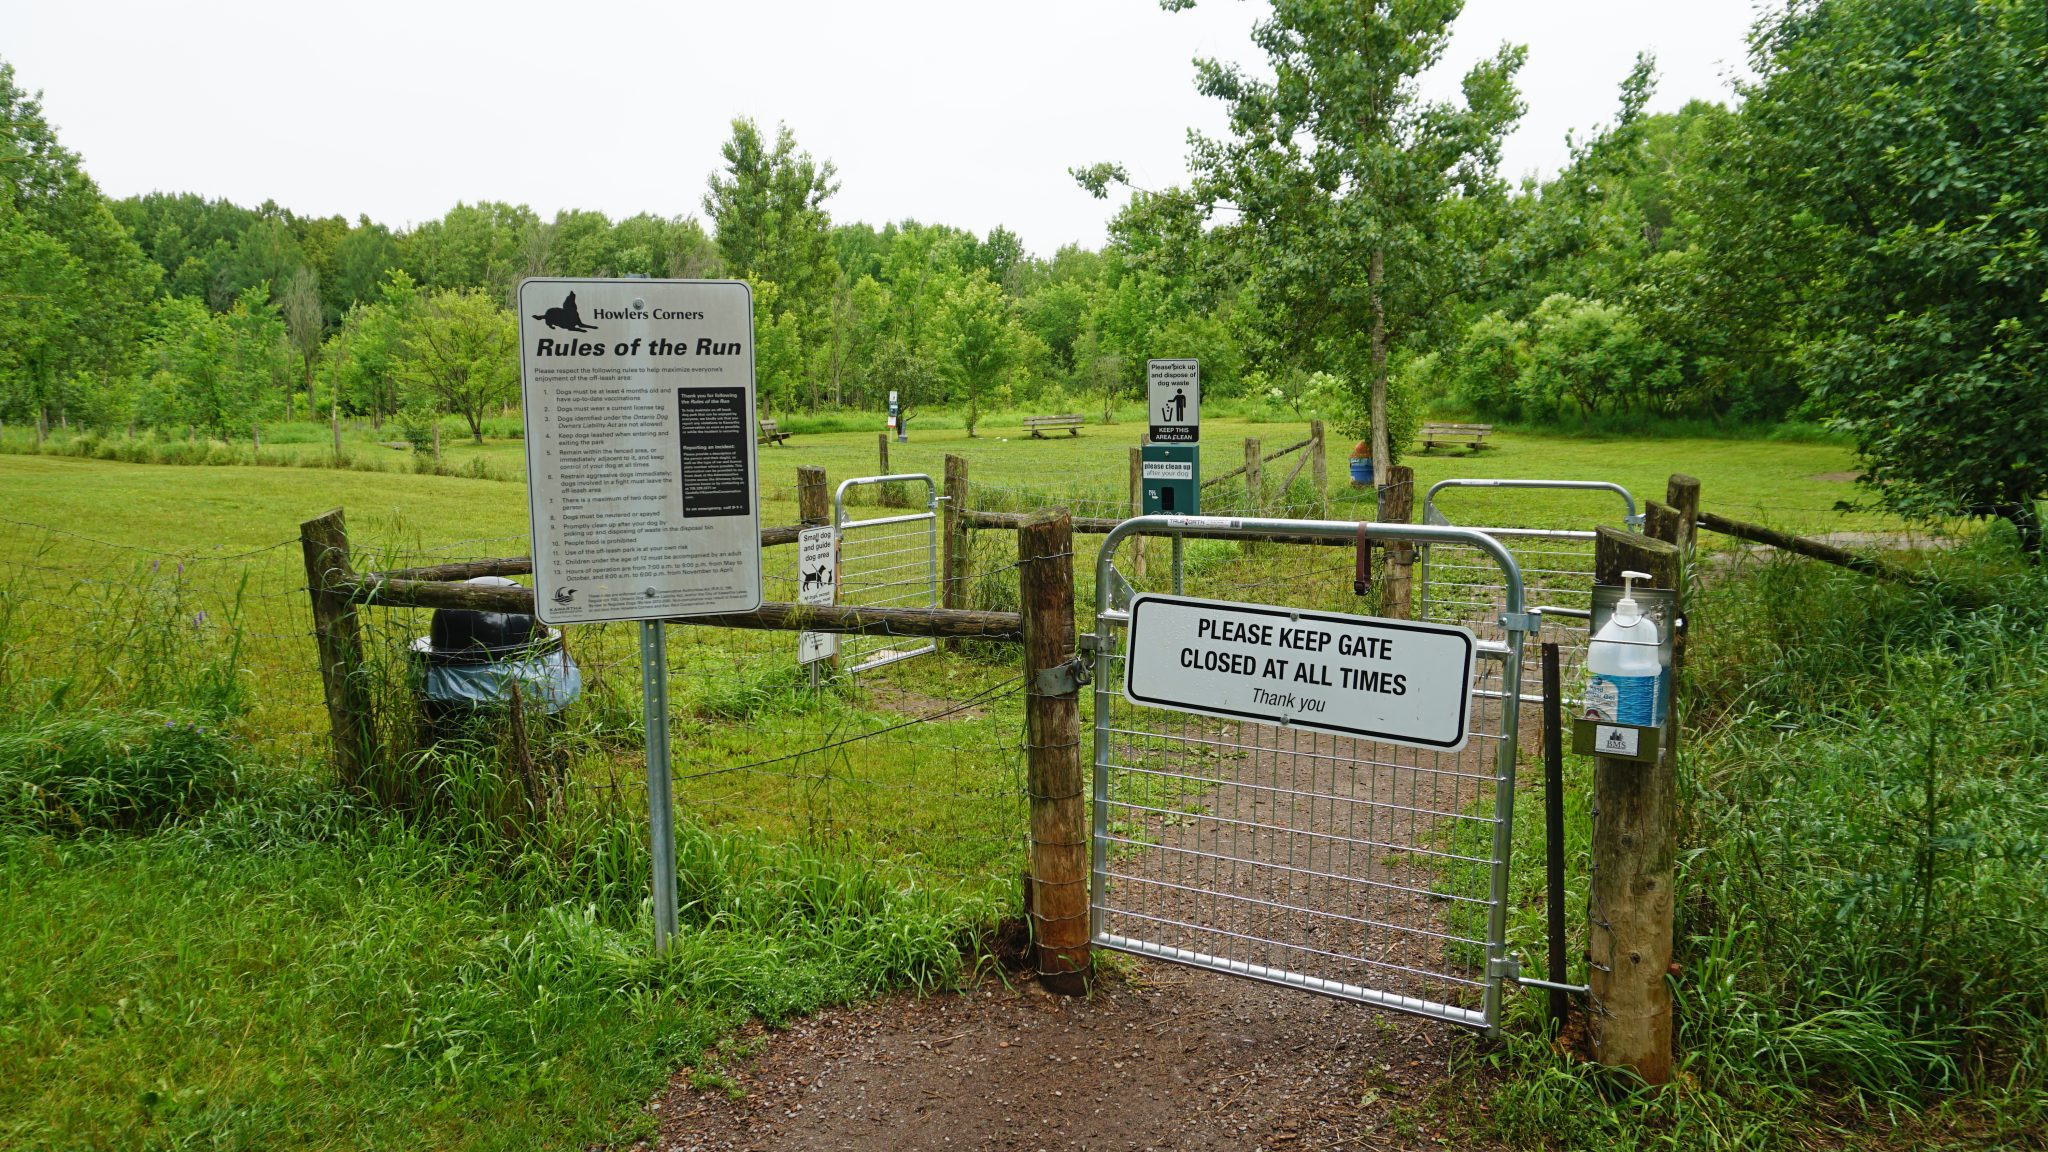 Dog Park/Off Leash Area Archives - Ontario’s Conservation Areas